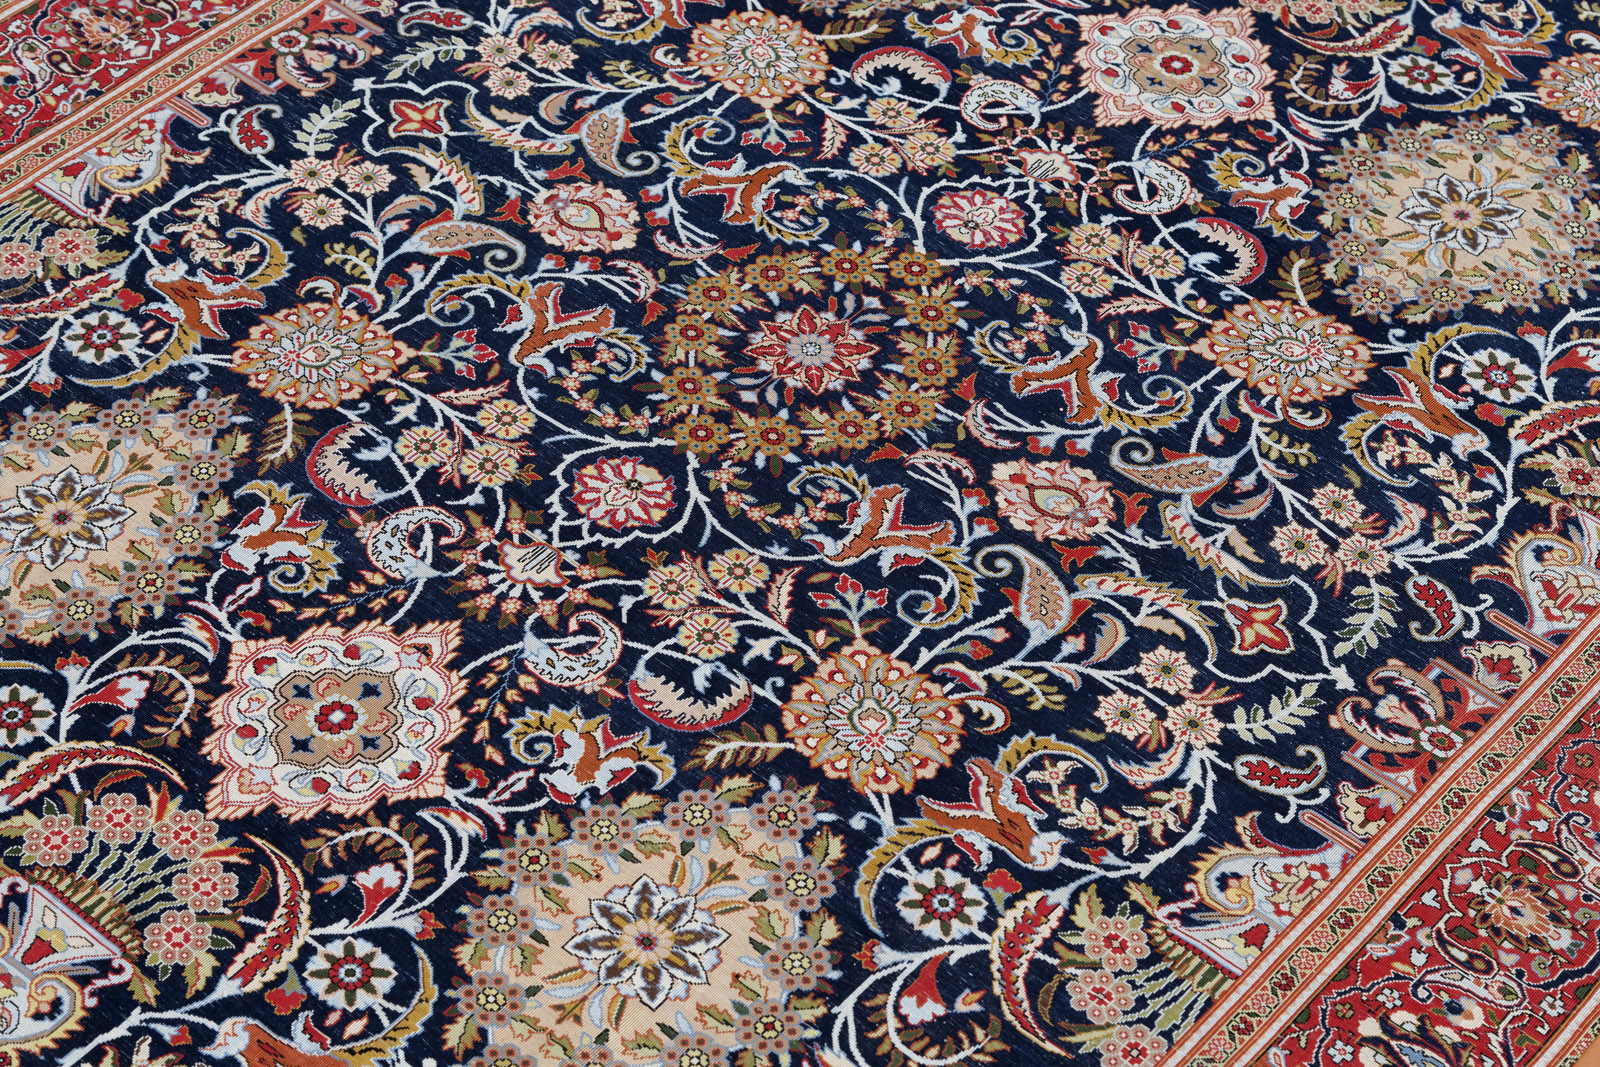 AN ALL OVER PATTERNED SILK RUG - Image 8 of 13